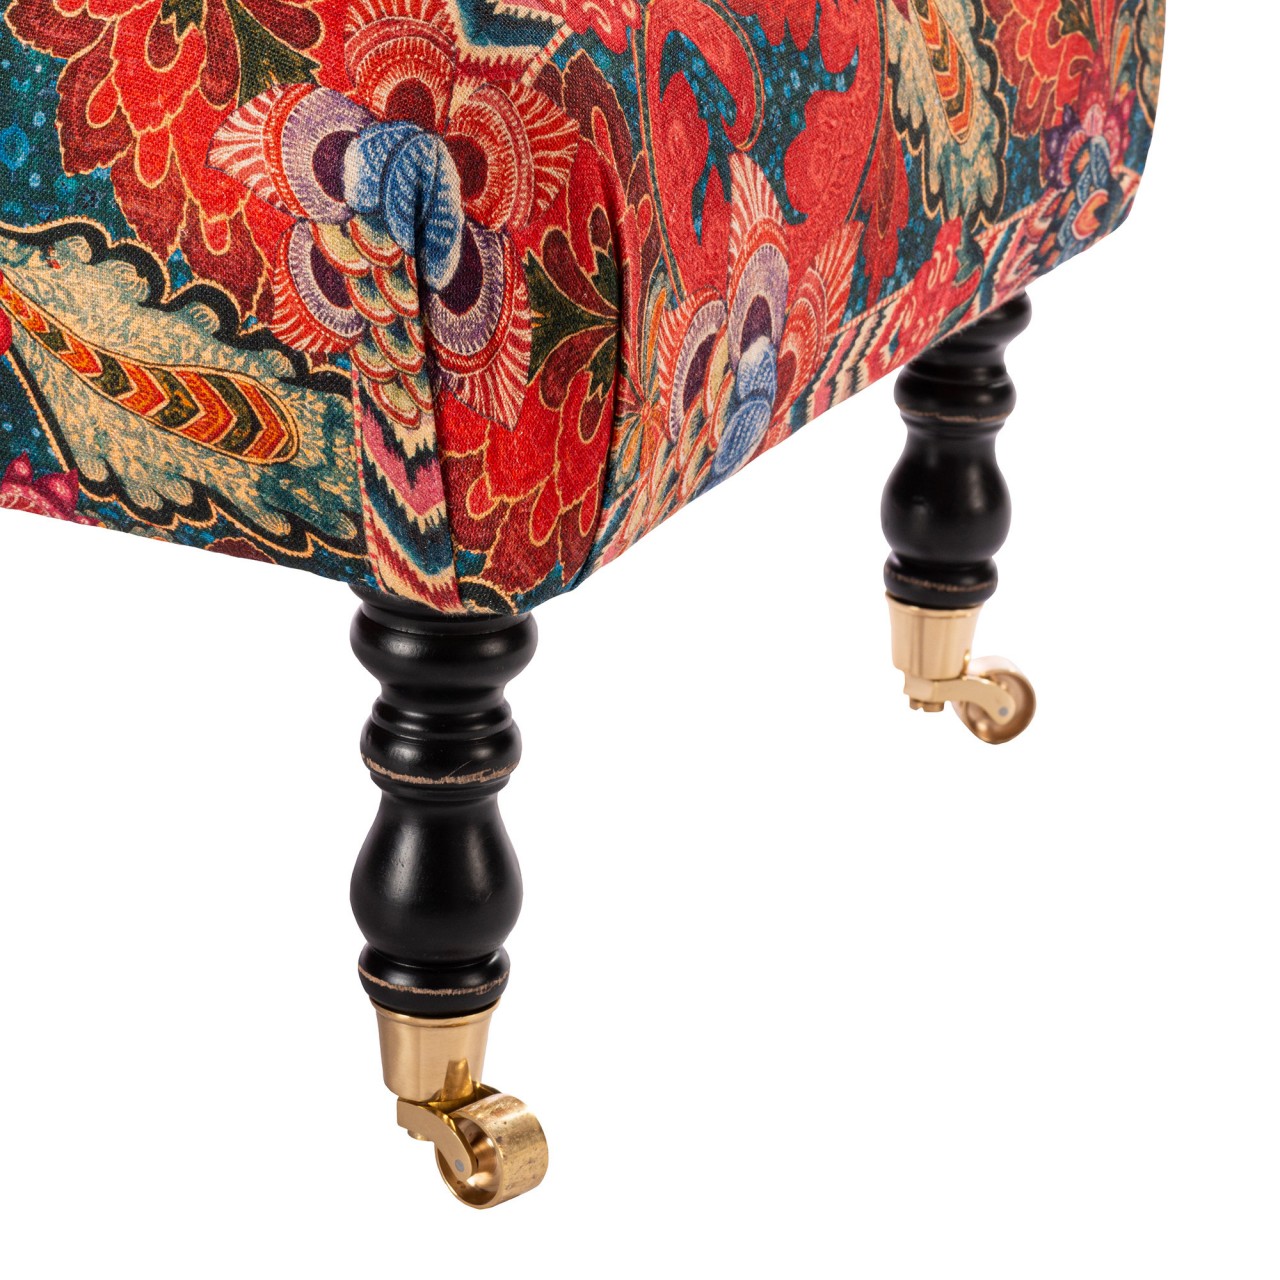 HUDSON STOOL - PSYCHEDELIA Fabric